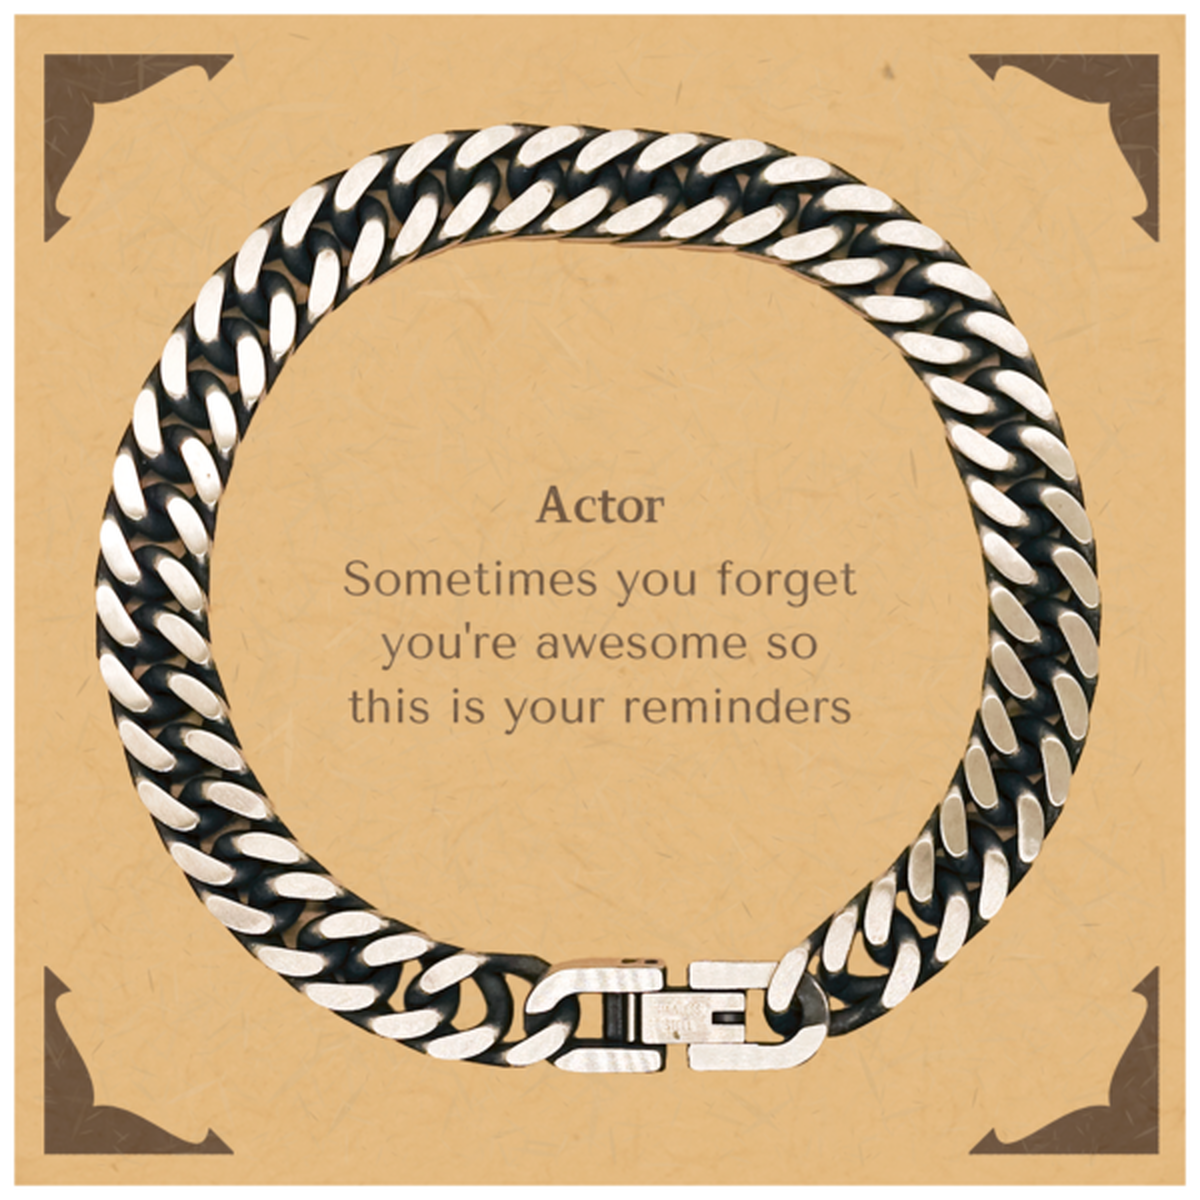 Sentimental Actor Cuban Link Chain Bracelet, Actor Sometimes you forget you're awesome so this is your reminders, Graduation Christmas Birthday Gifts for Actor, Men, Women, Coworkers